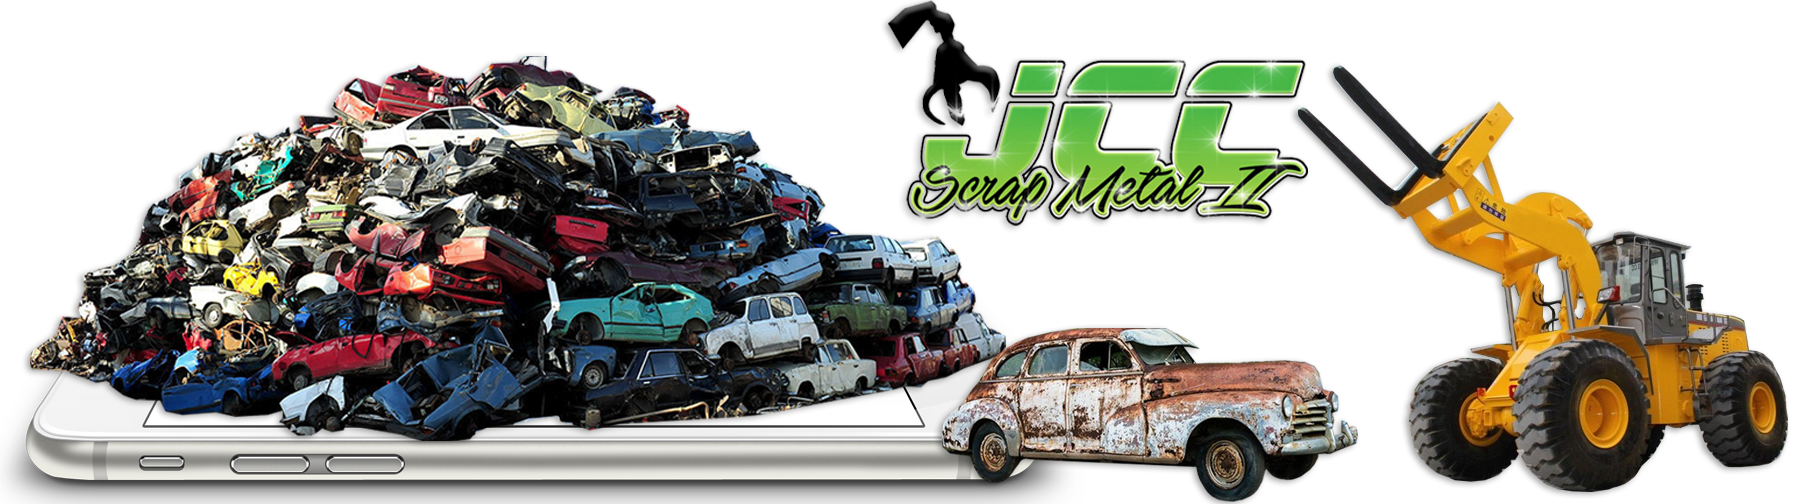 Scrap Metal Recycling Professional Services, Lindenhurst, NY - Graphic | Suffolk County, Long Island, NY | JCC Scrap Metal II, 631-816-2000, jccscrapmetal2@gmail.com